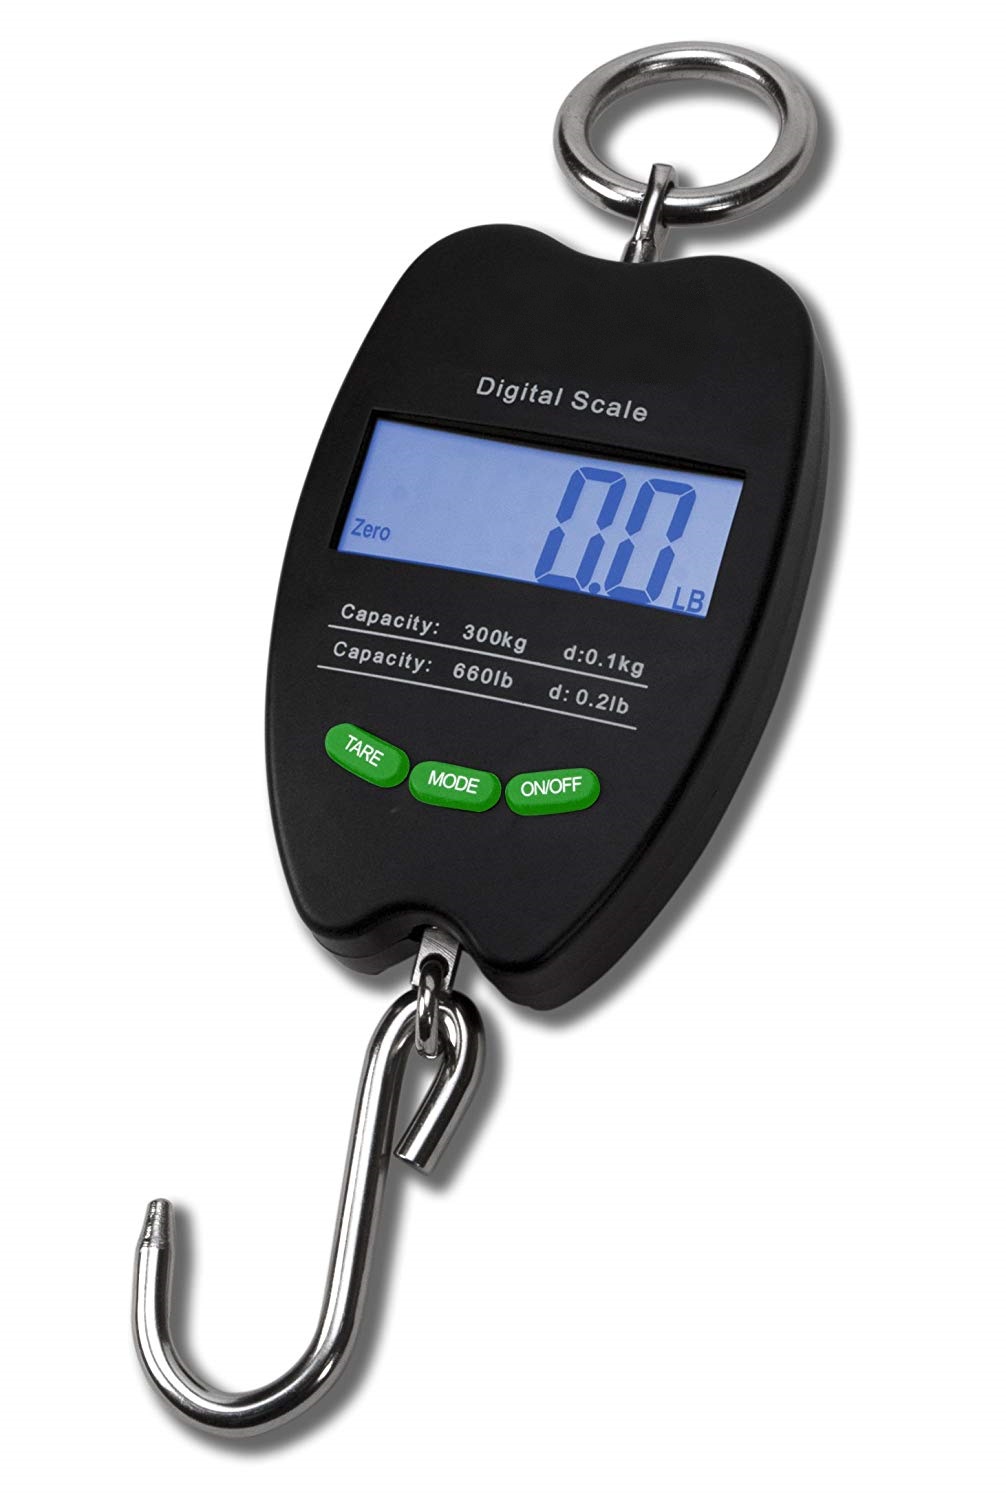 https://advancedtoolcorp.com/wp-content/uploads/2018/11/performance-tool-w1478-black-digital-hanging-game-scale-660lb-for-for-hunting-home-automotive-and-more-2.jpg